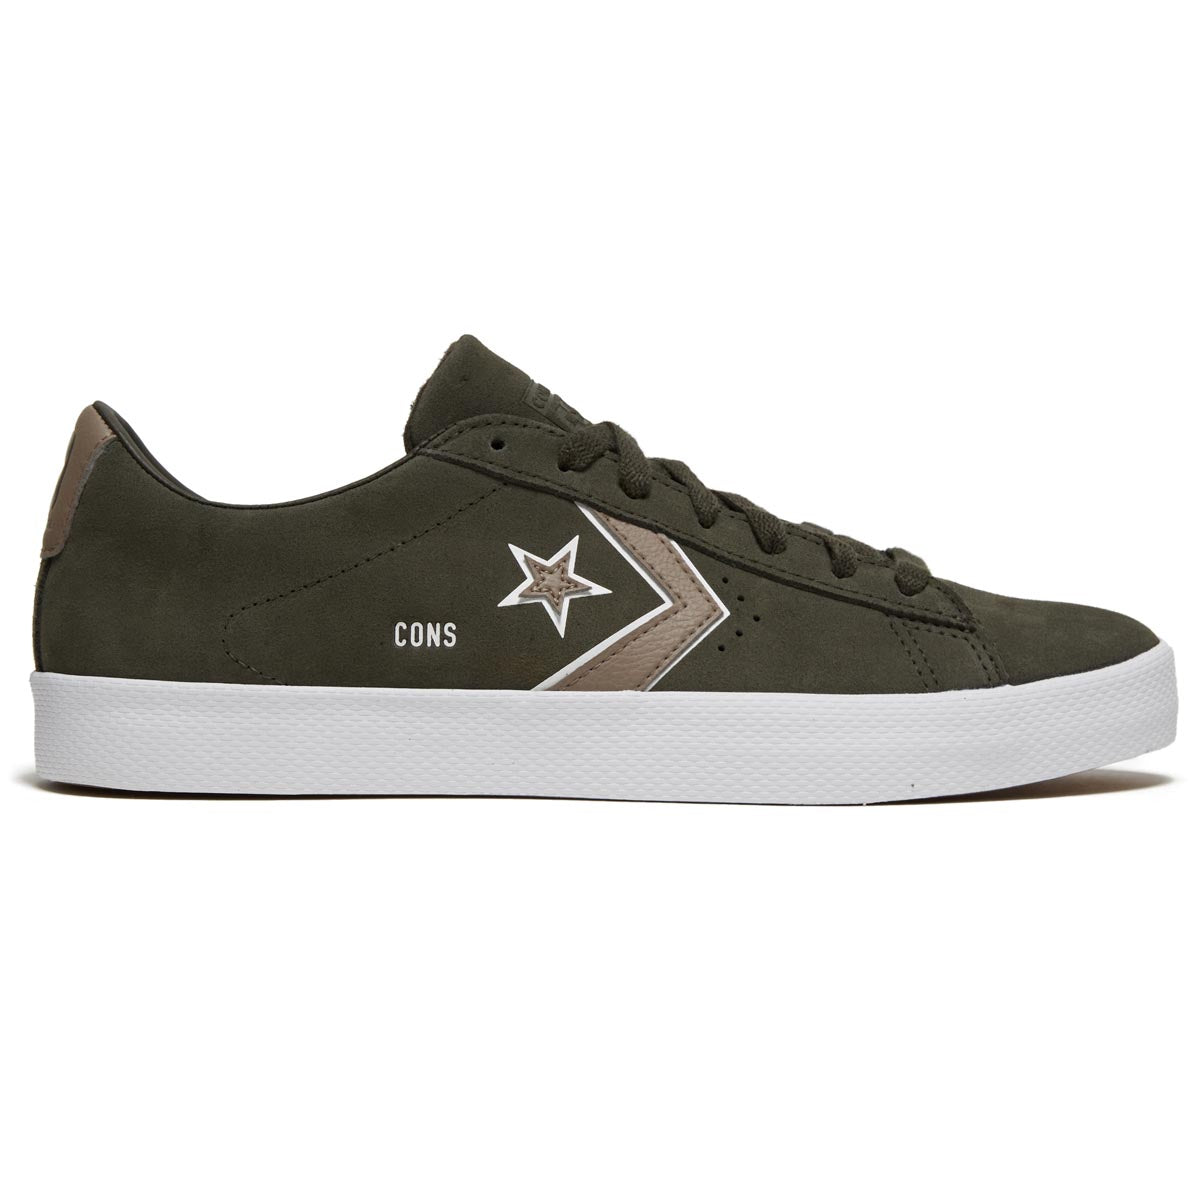 Converse Pl Vulc Pro Classic Suede Ox Shoes - Cave Green/White/Mud Mask image 1